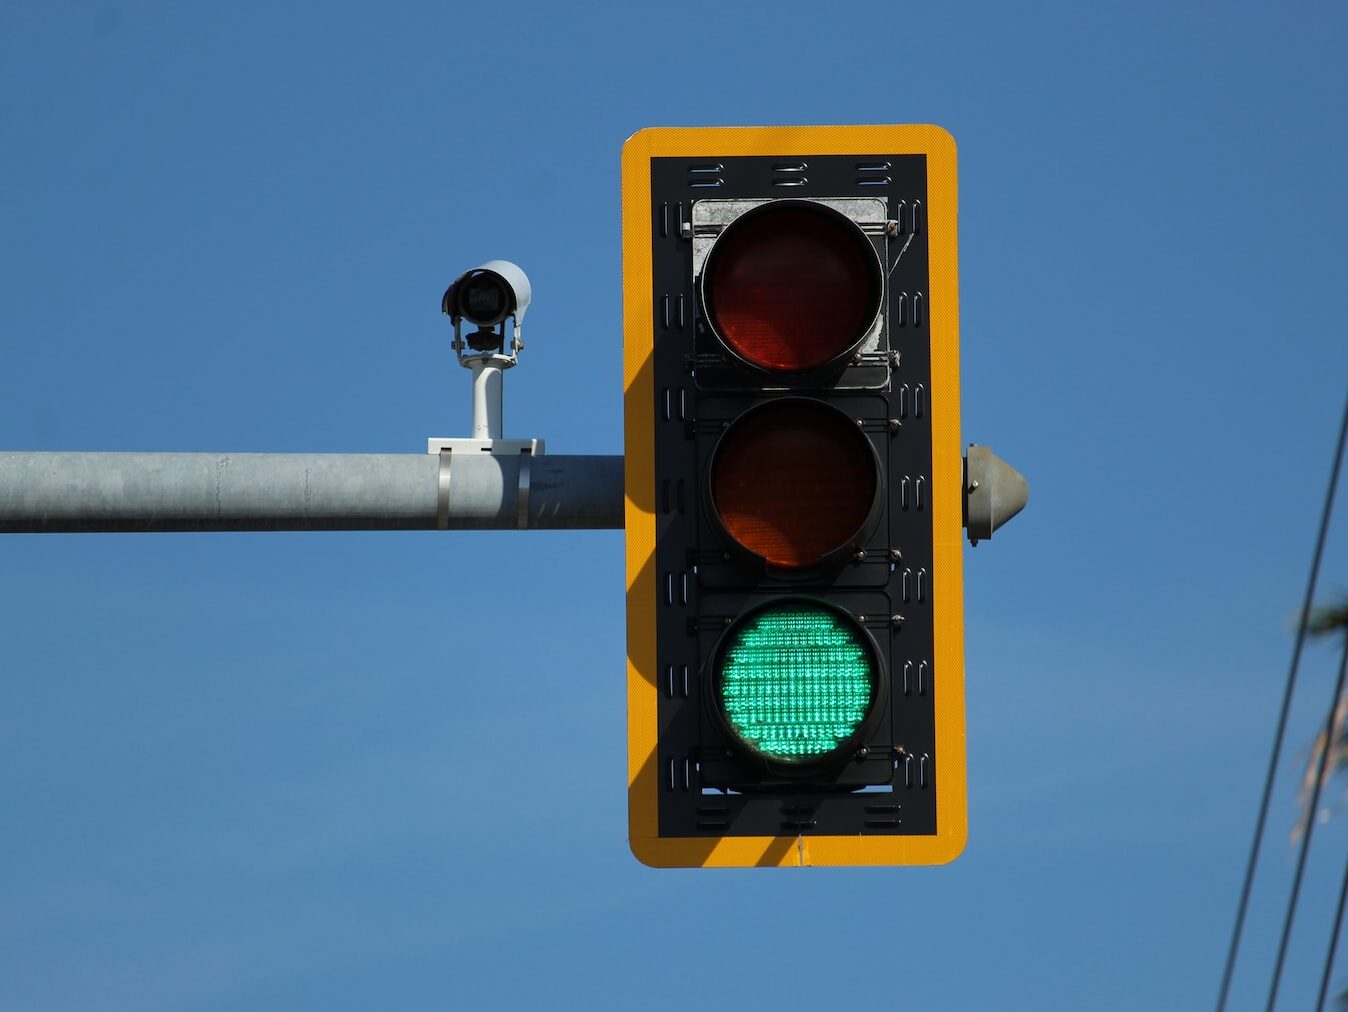 traffic light with red light